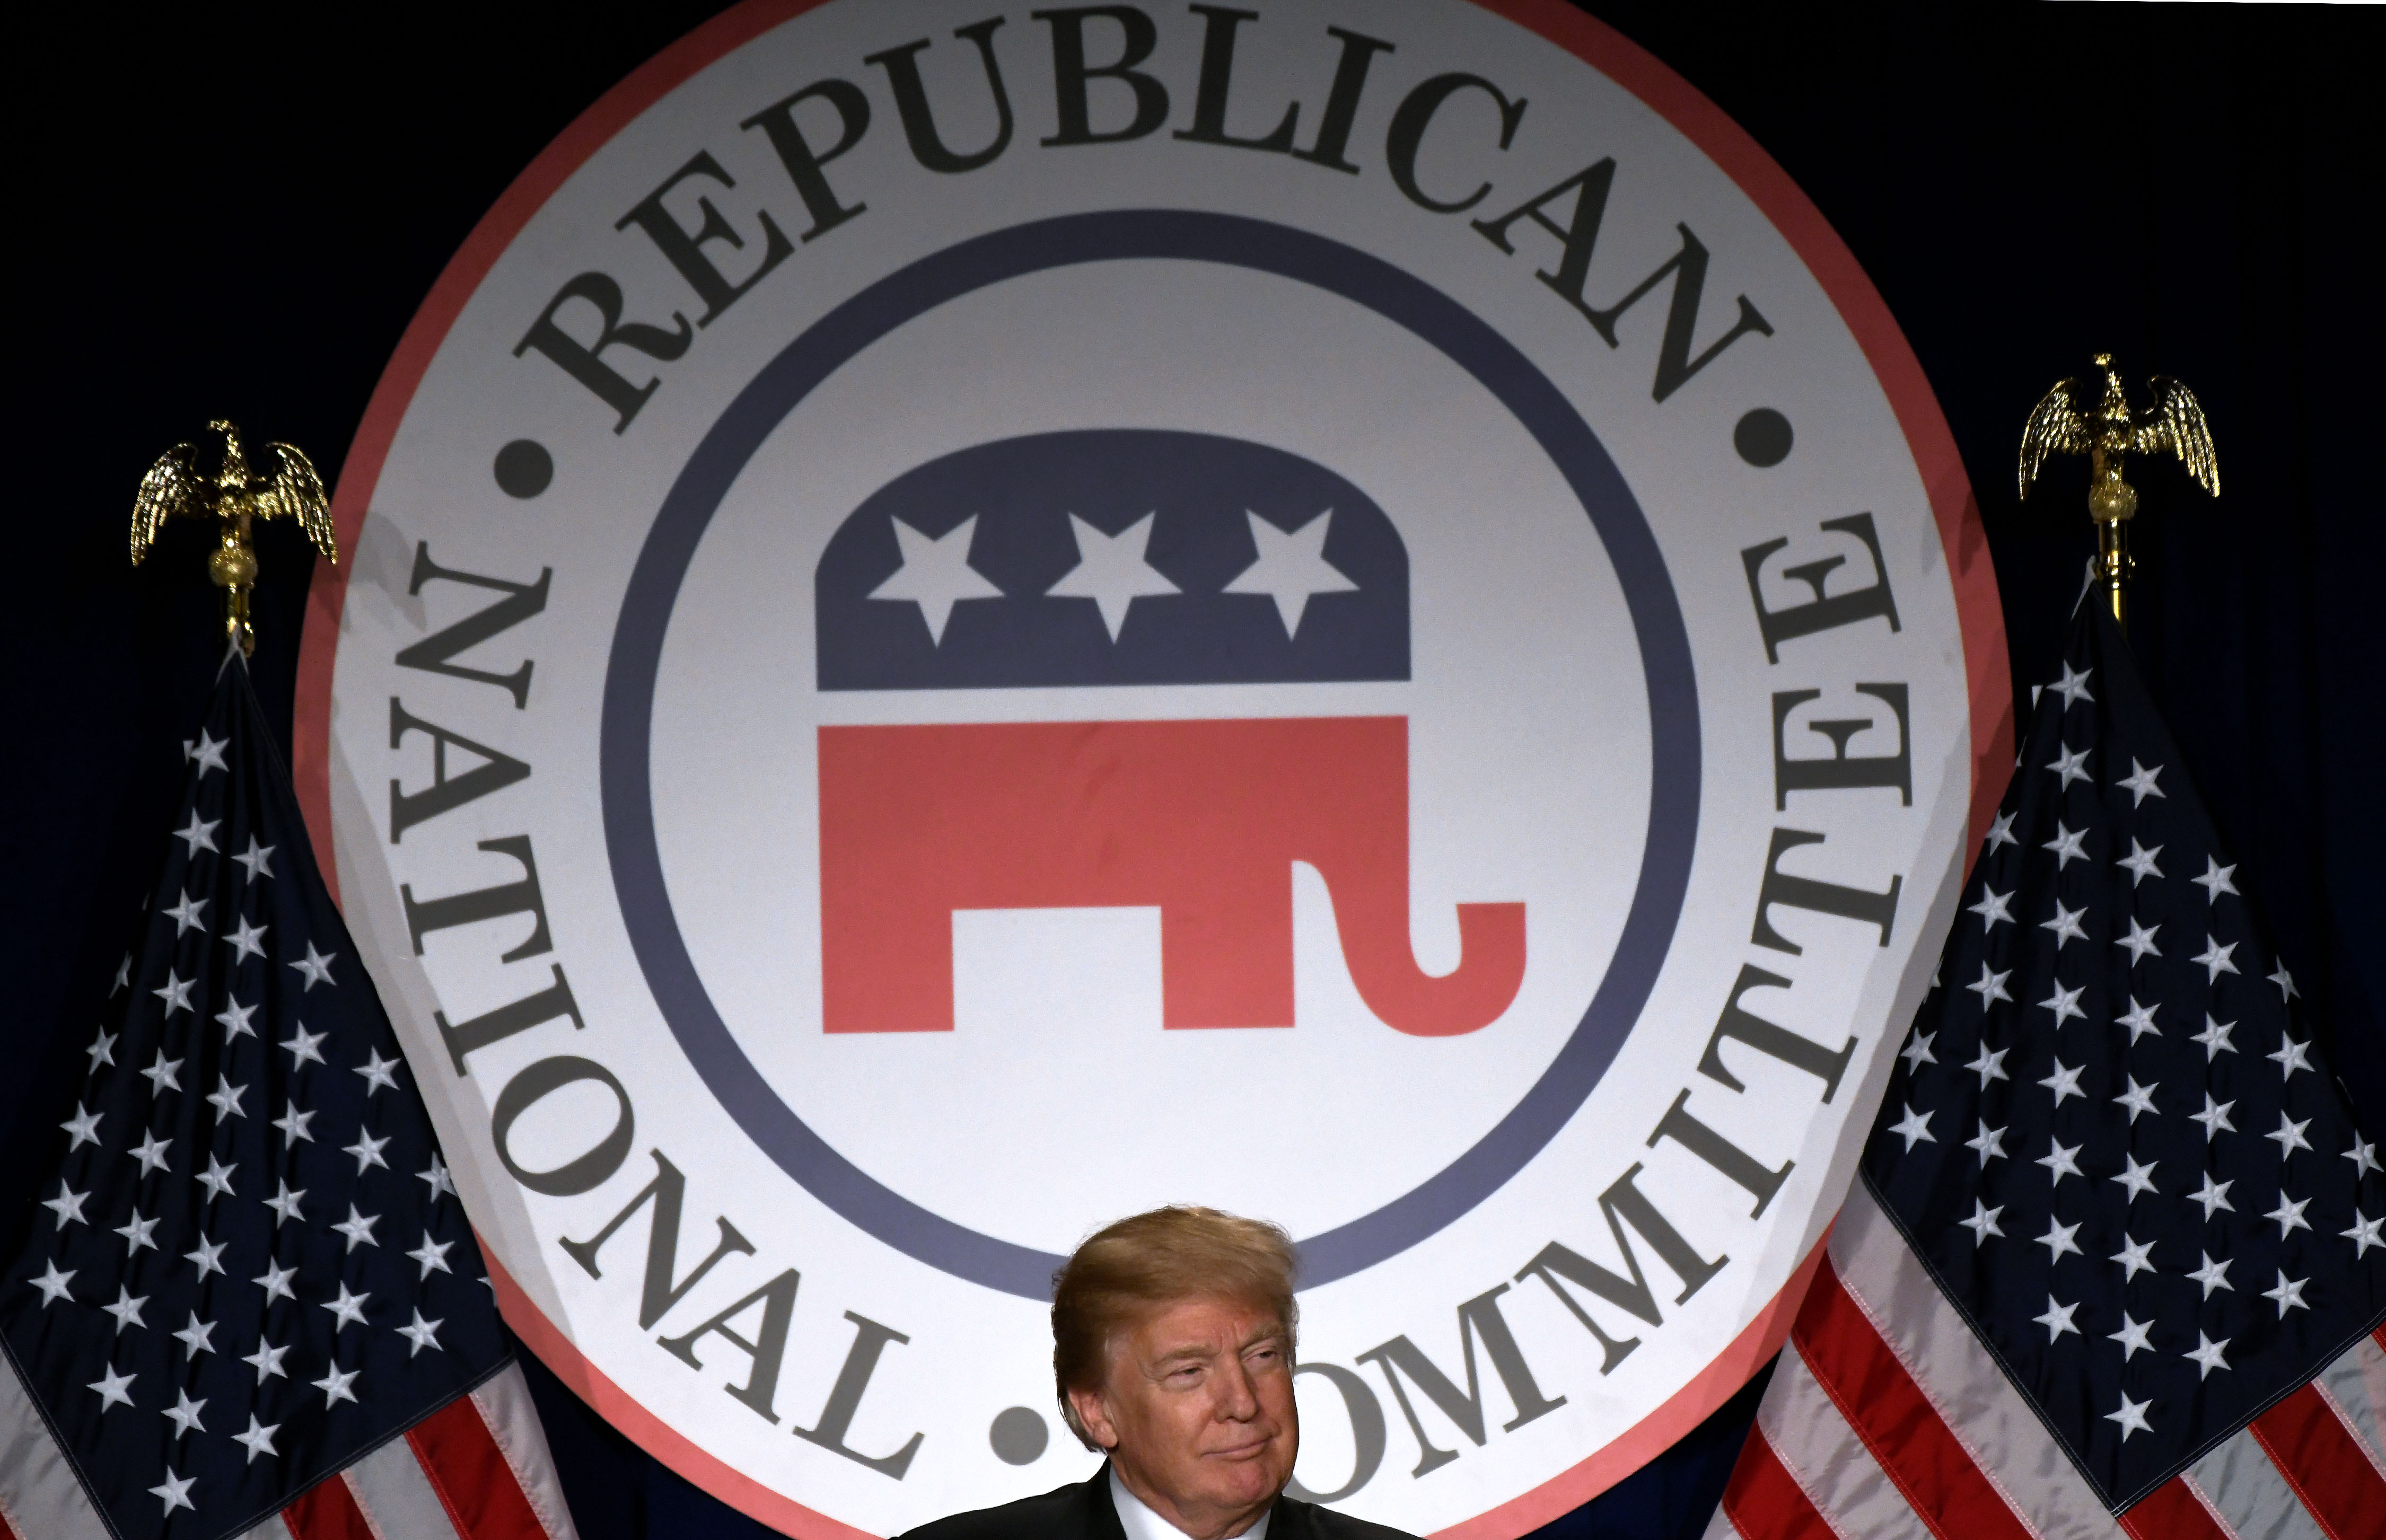 Republican National Committee Has Pumped Over 1.5 MILLION Into Trump's